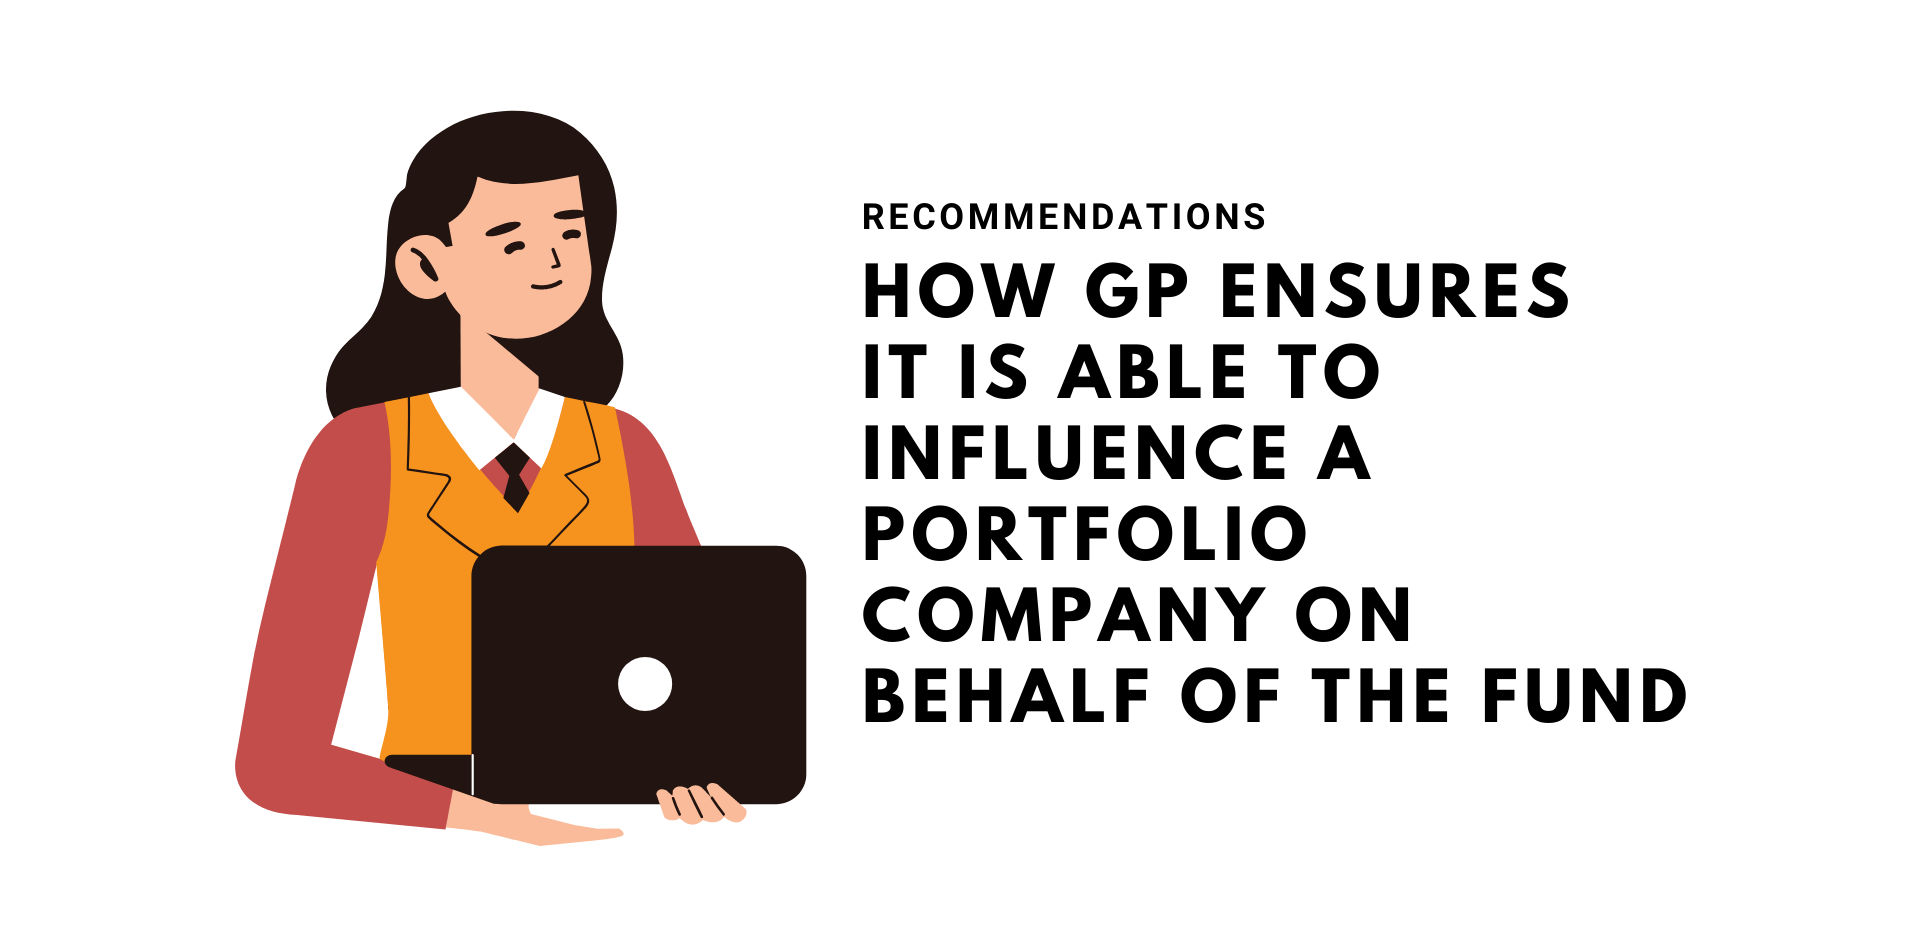 How GP Ensures It Is Able to Influence a Portfolio Company on Behalf of the Fund